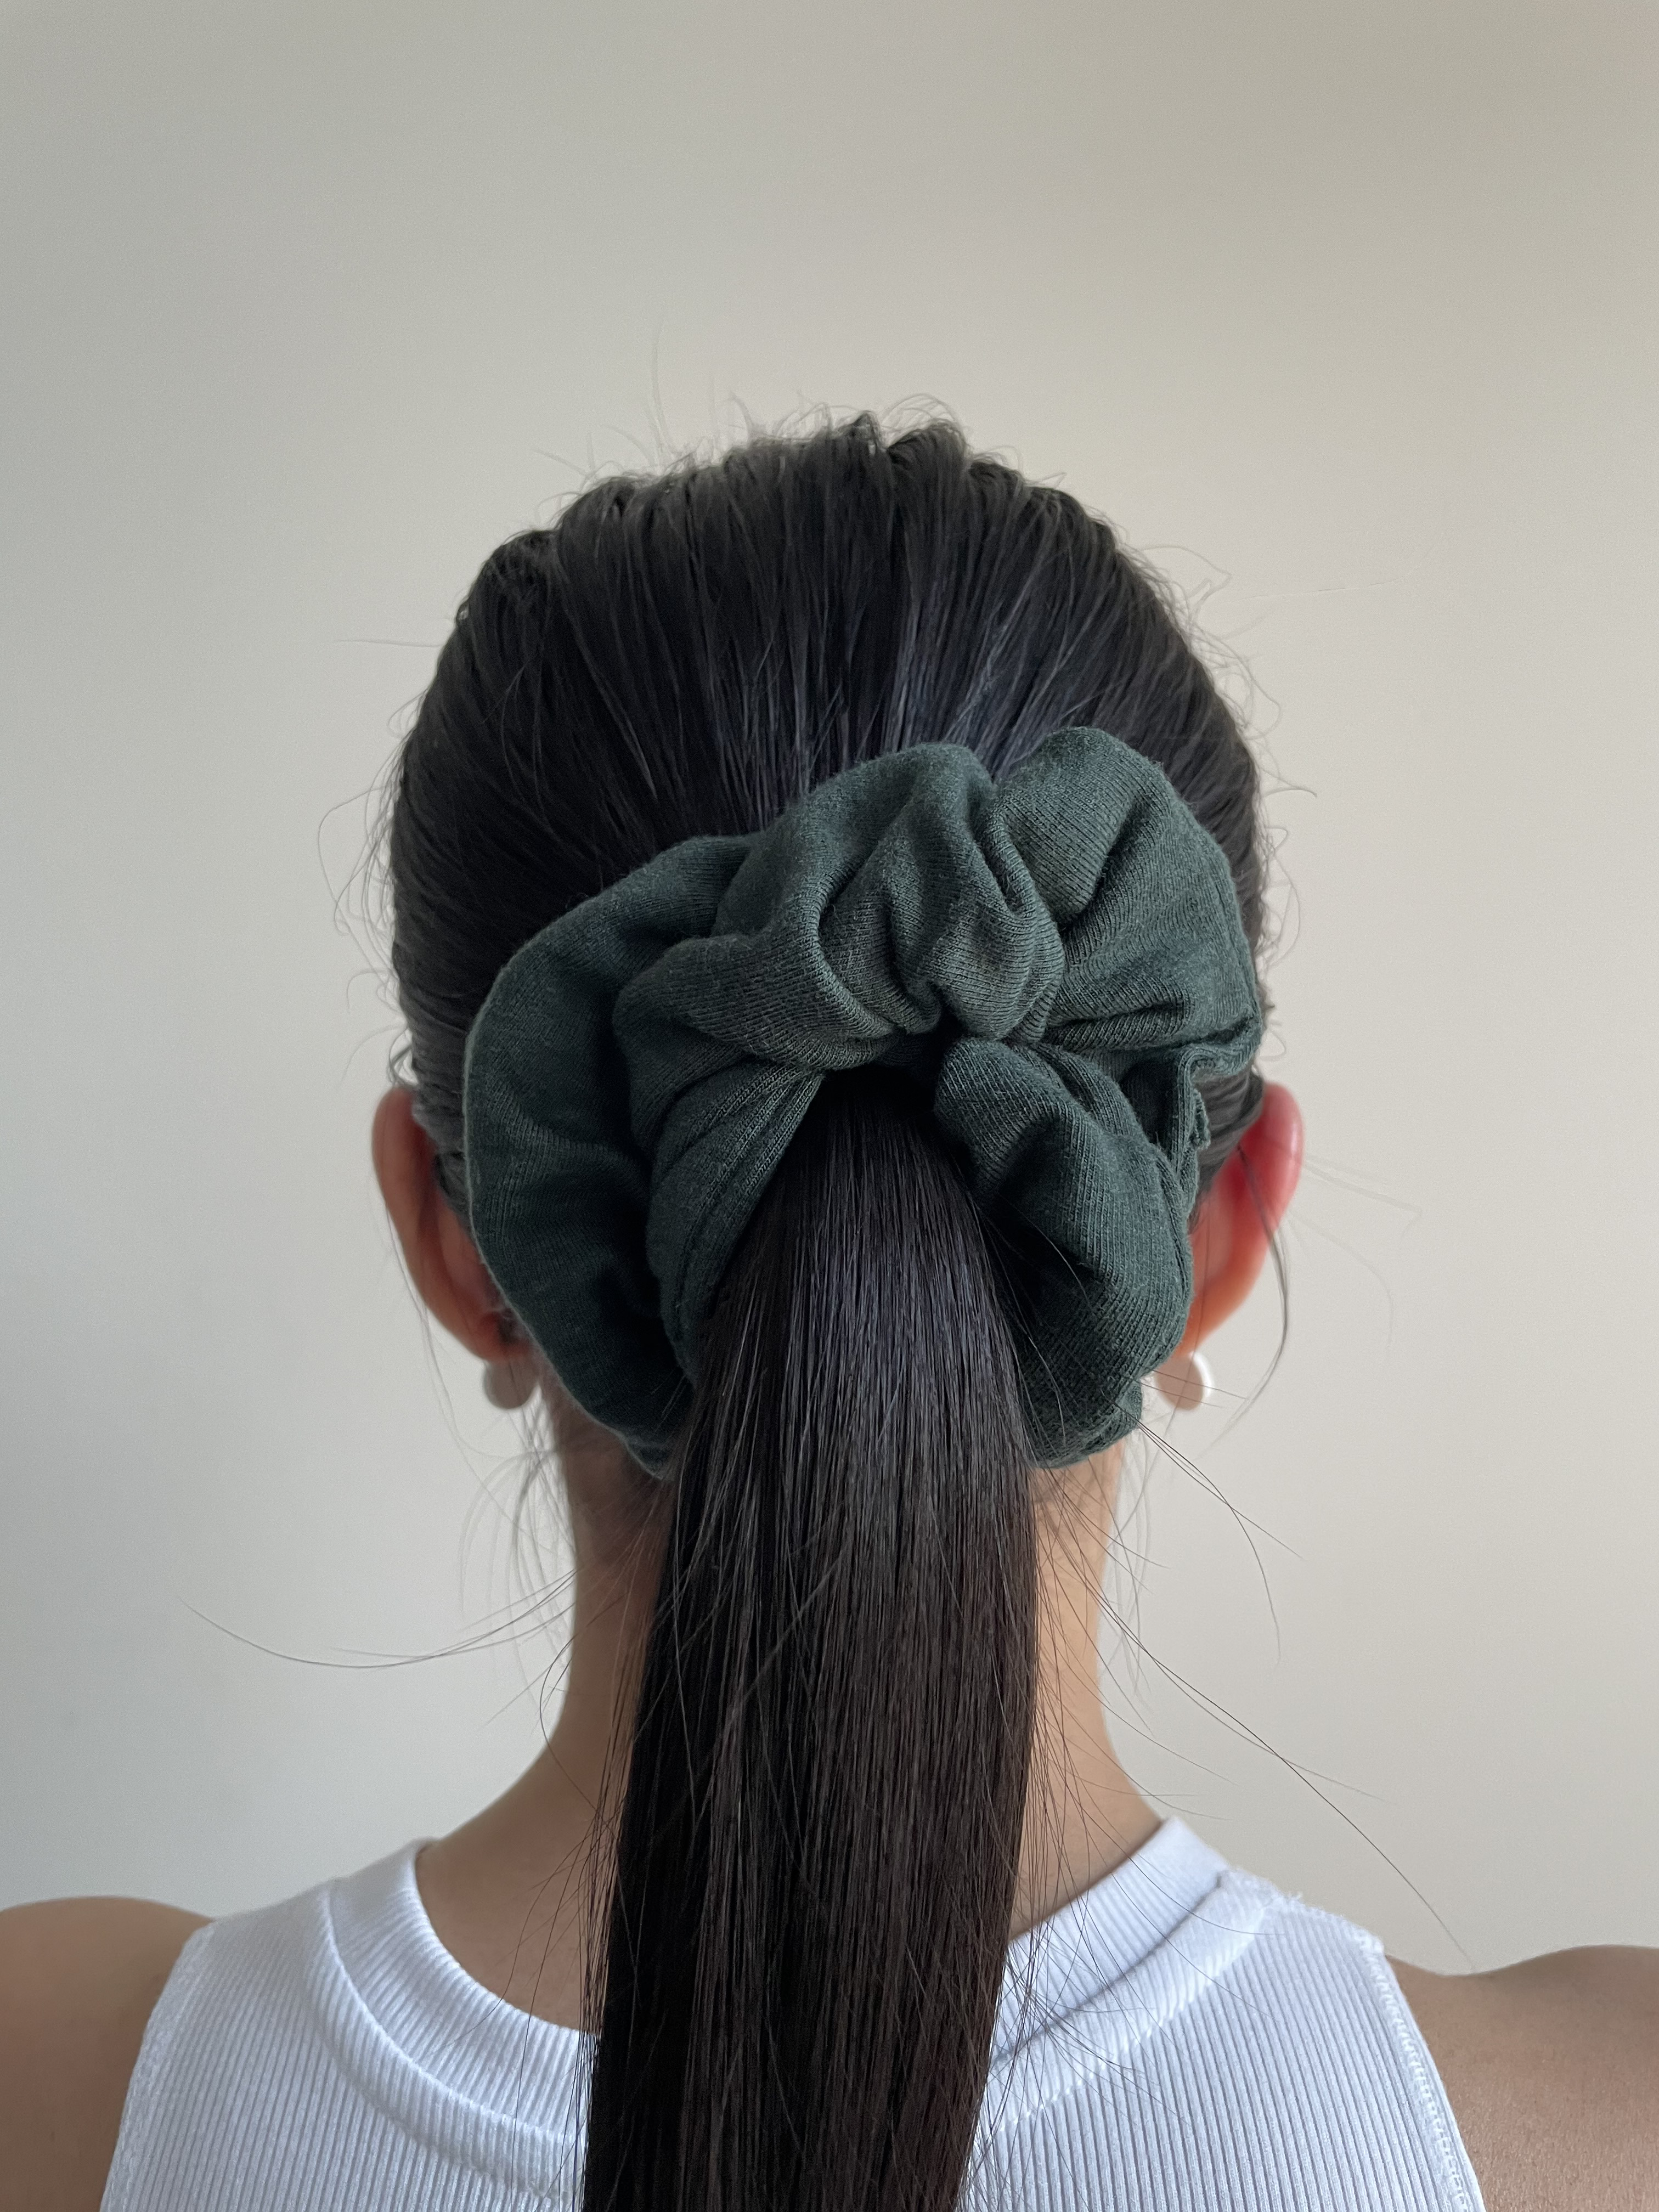 Siena Vida Forest Sweater Scrunchie in Classic size in model's ponytail.